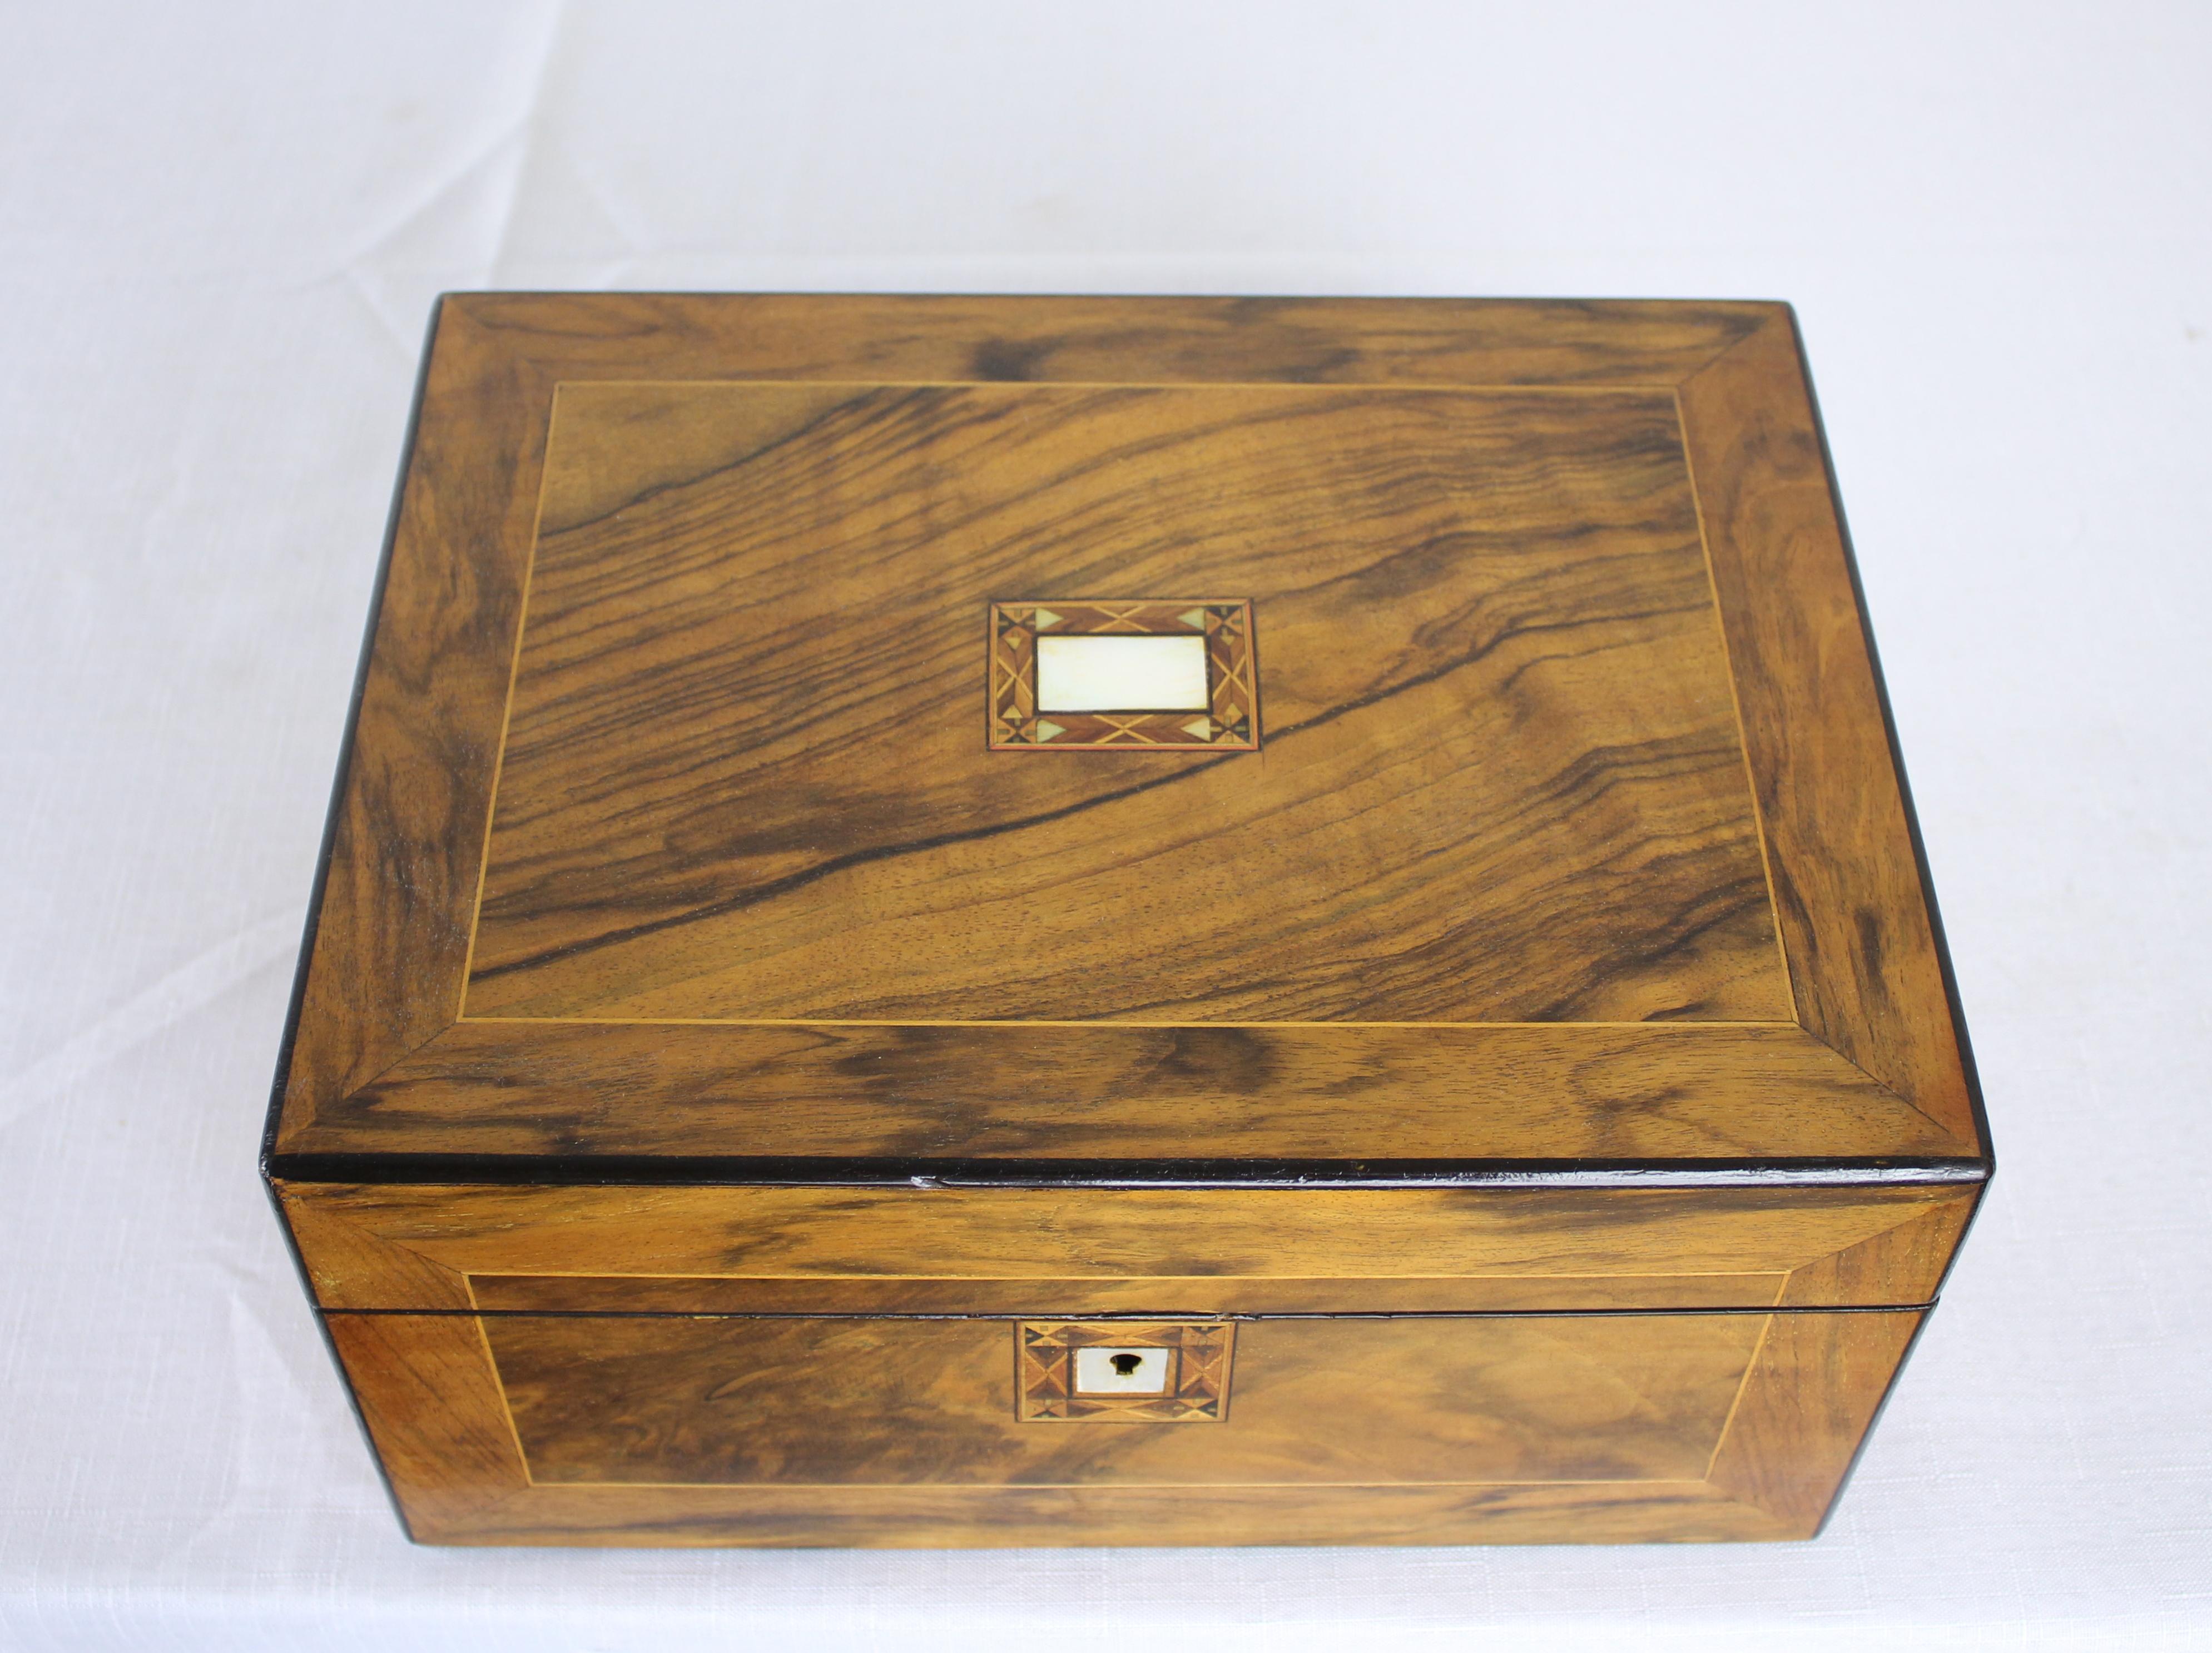 A dramatically grained walnut sewing box inlaid with ebony and boxwood. Nice mother-of pearl detail around keyhole and on the top. Lined with vibrant pink satin. Original key and good divided interior space.